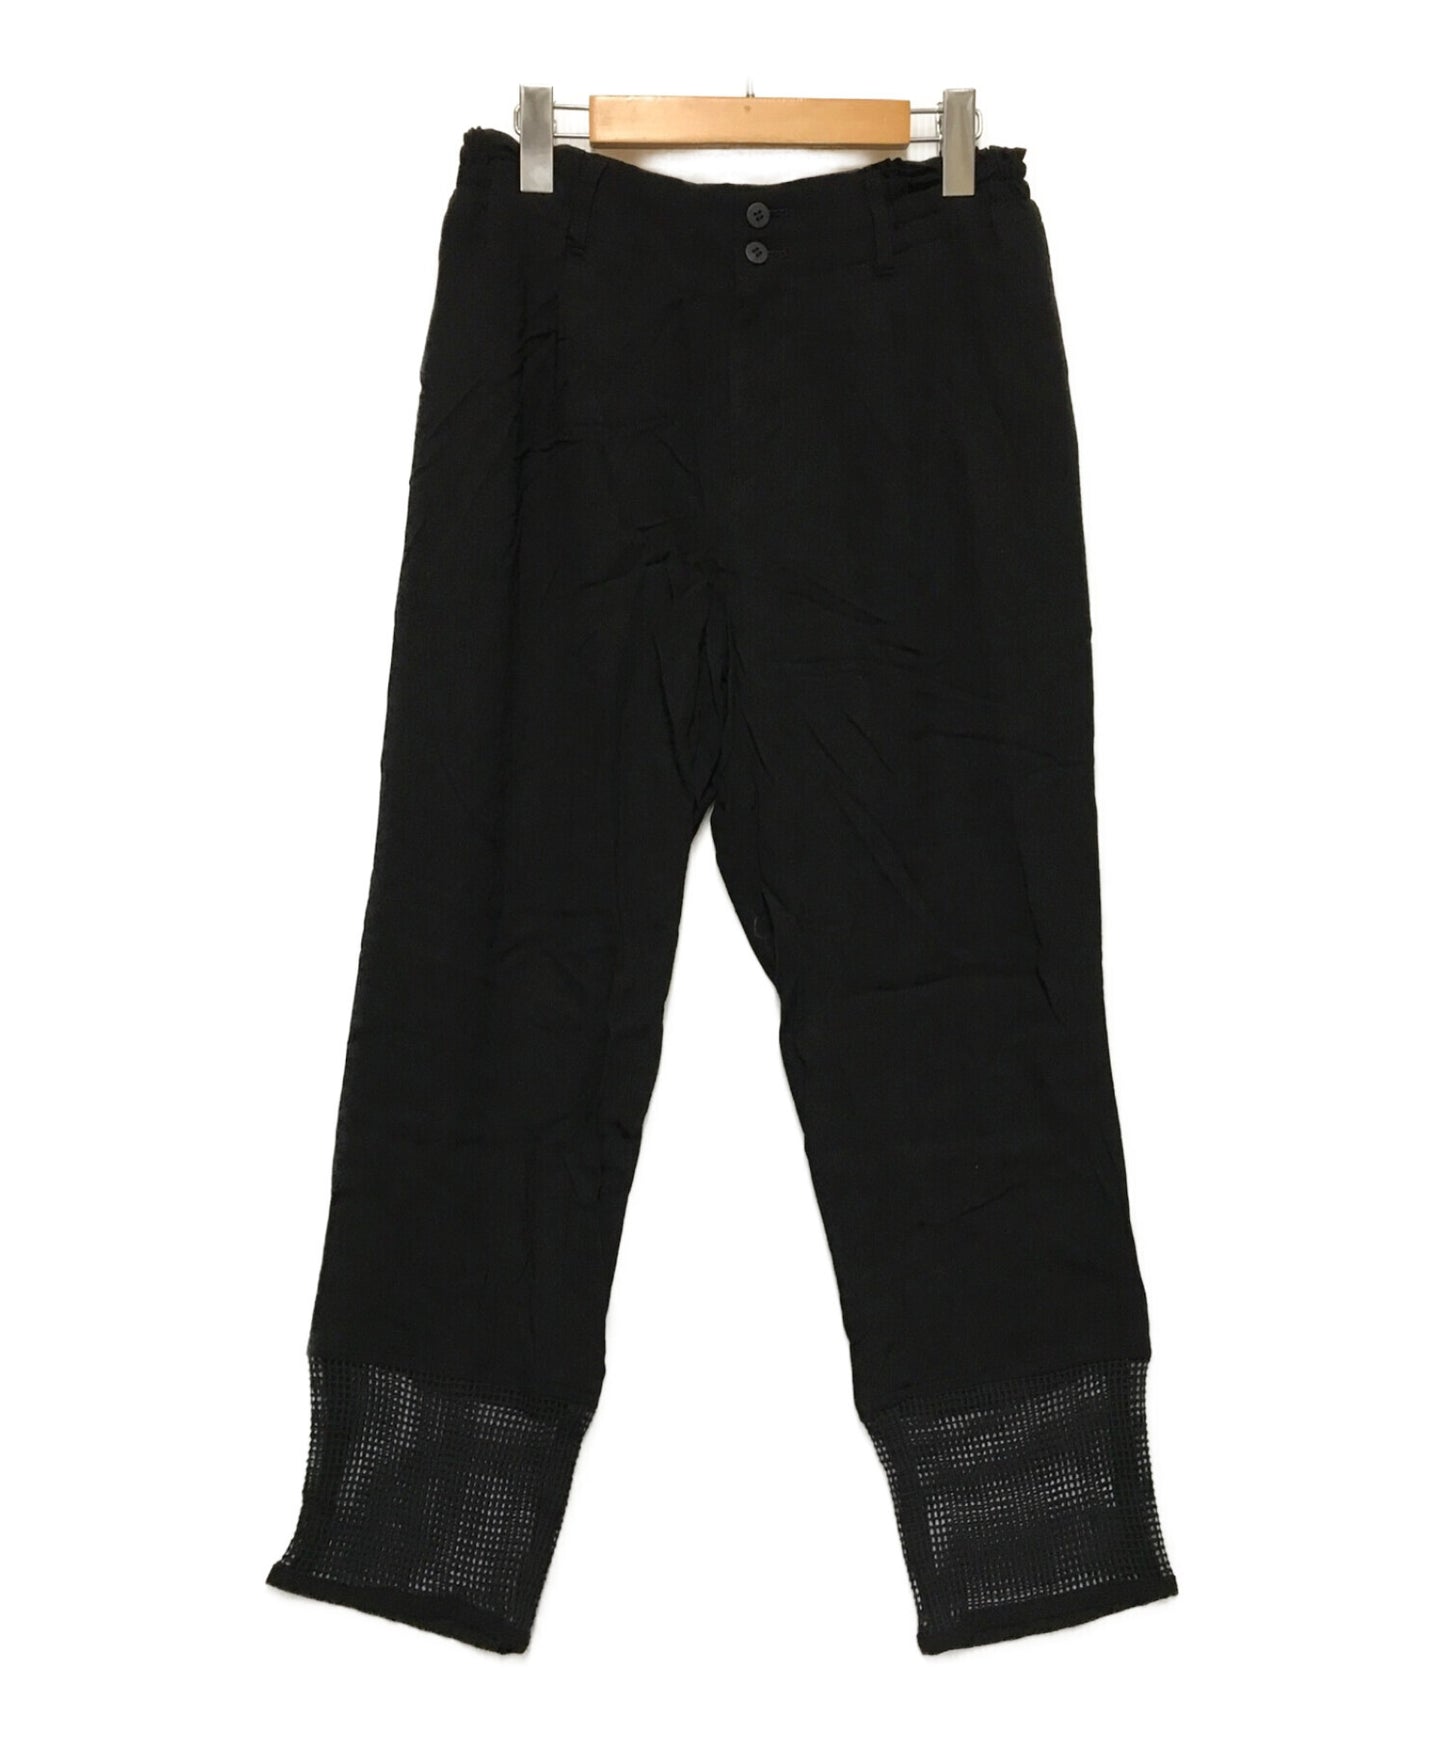 [Pre-owned] ISSEY MIYAKE lace-up pants IM41FF539